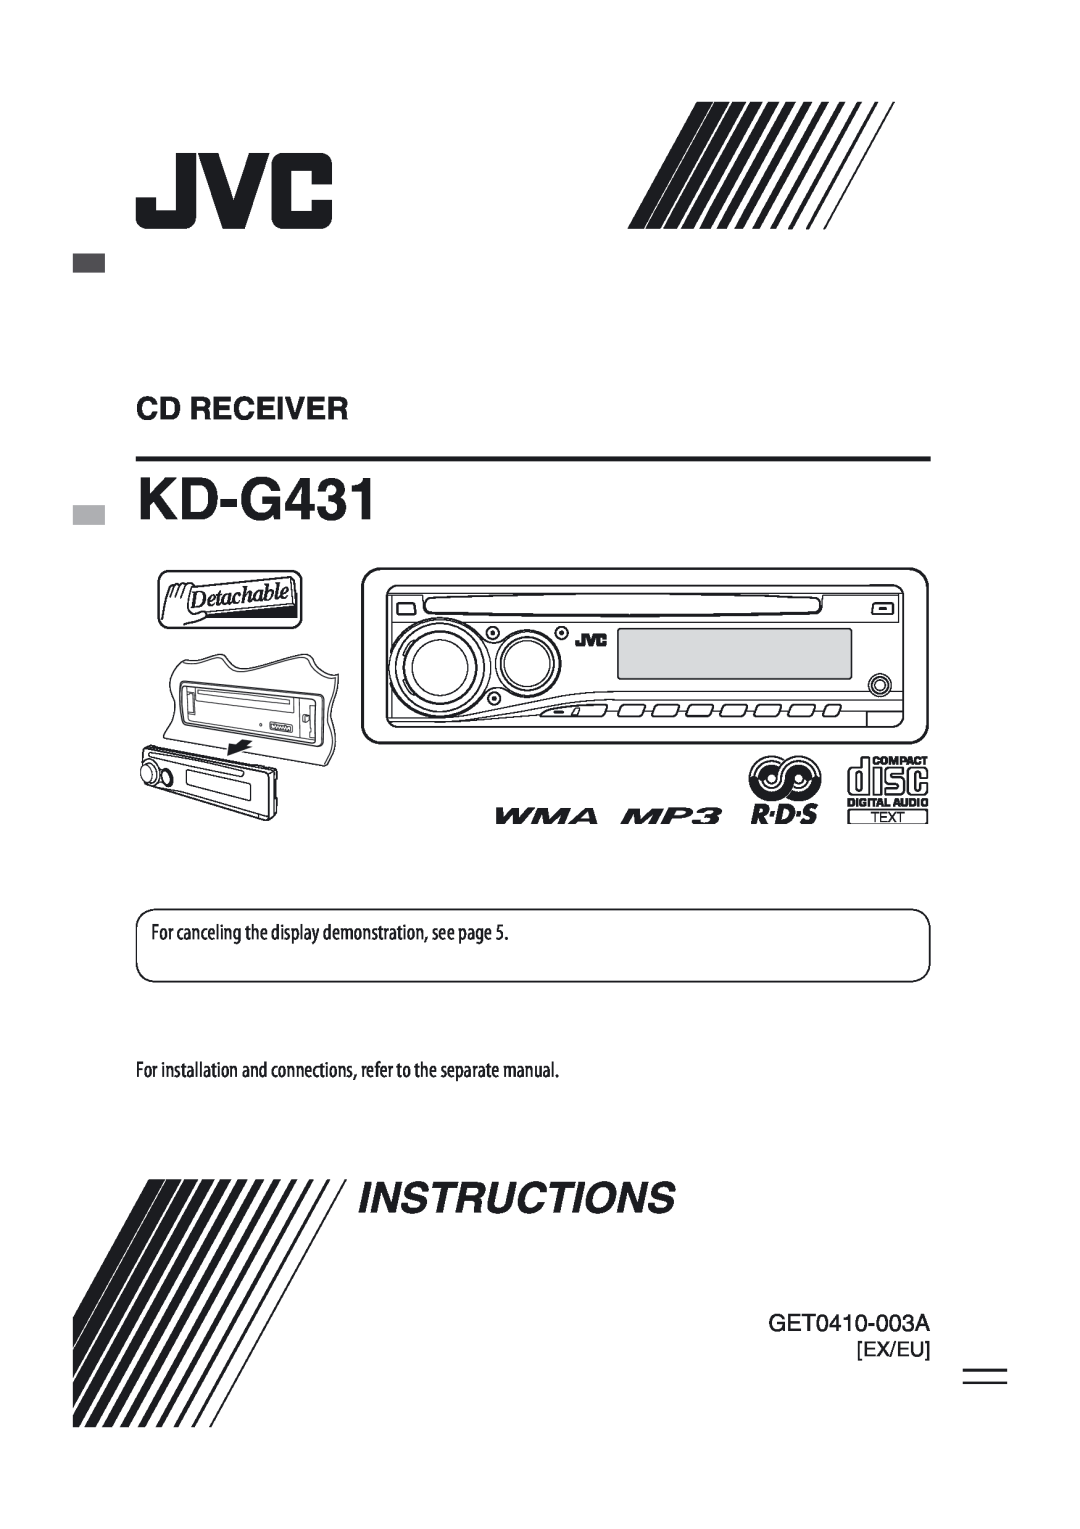 JVC KD-G431 manual GET0410-003A, Instructions, Cd Receiver, For canceling the display demonstration, see page, Ex/Eu 